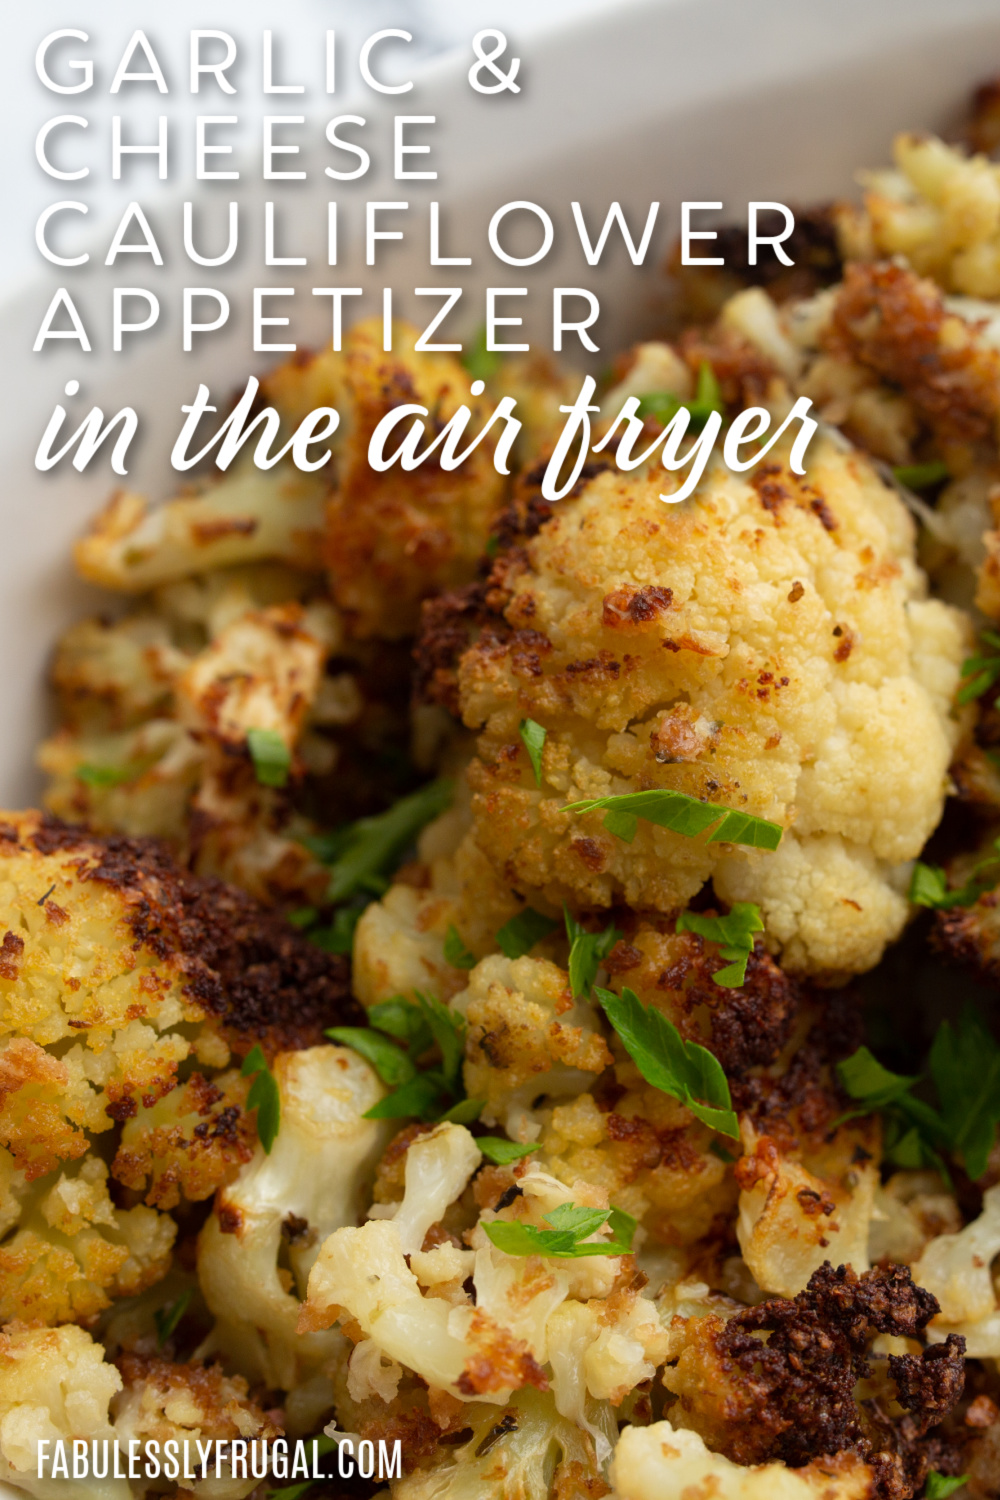 garlic and cheese cauliflower appetizer in the air fryer